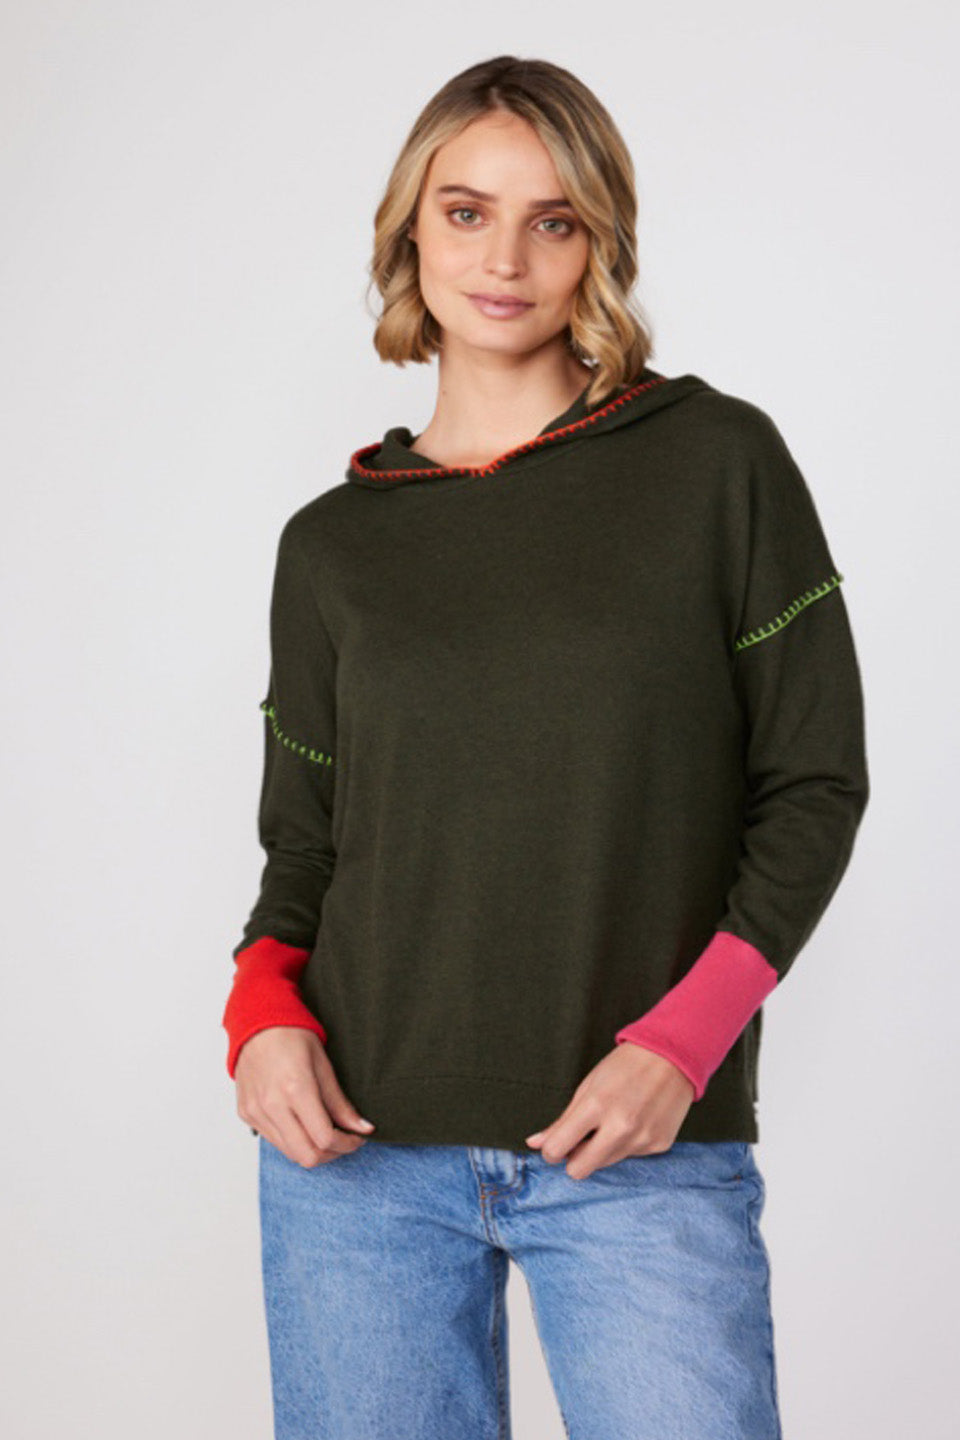 WHIPSTITCH HOODIE - MILITARY - Kingfisher Road - Online Boutique